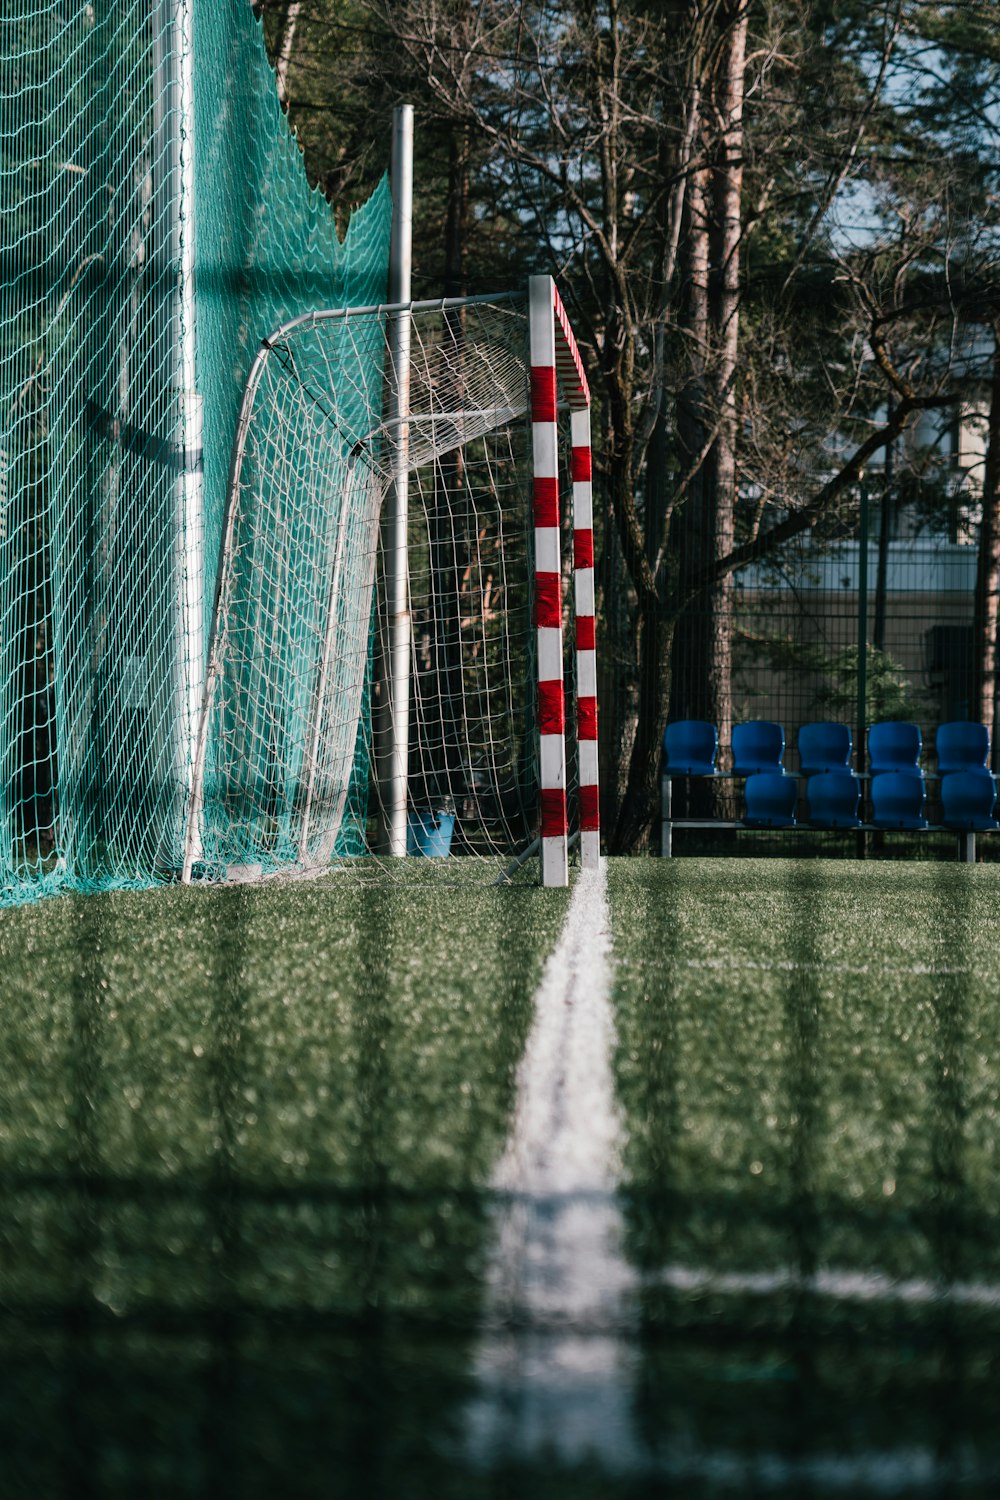 a soccer field with a goal and a red and white marker